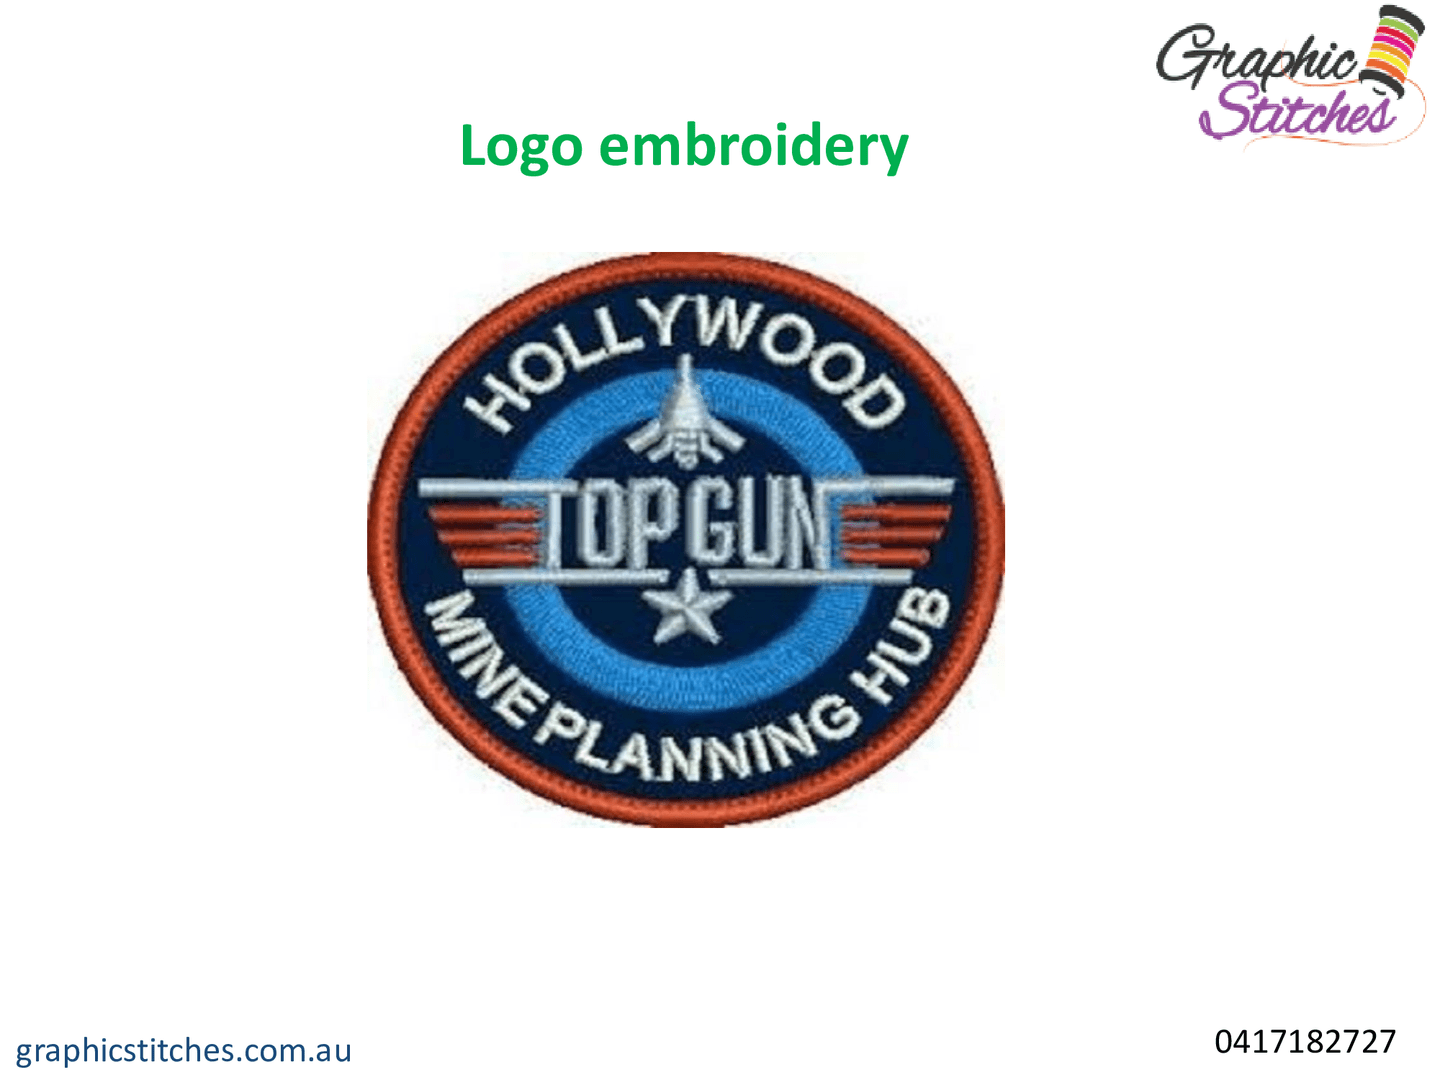 Logo embroidery- Graphic Stitches.gif  by Graphicstitch